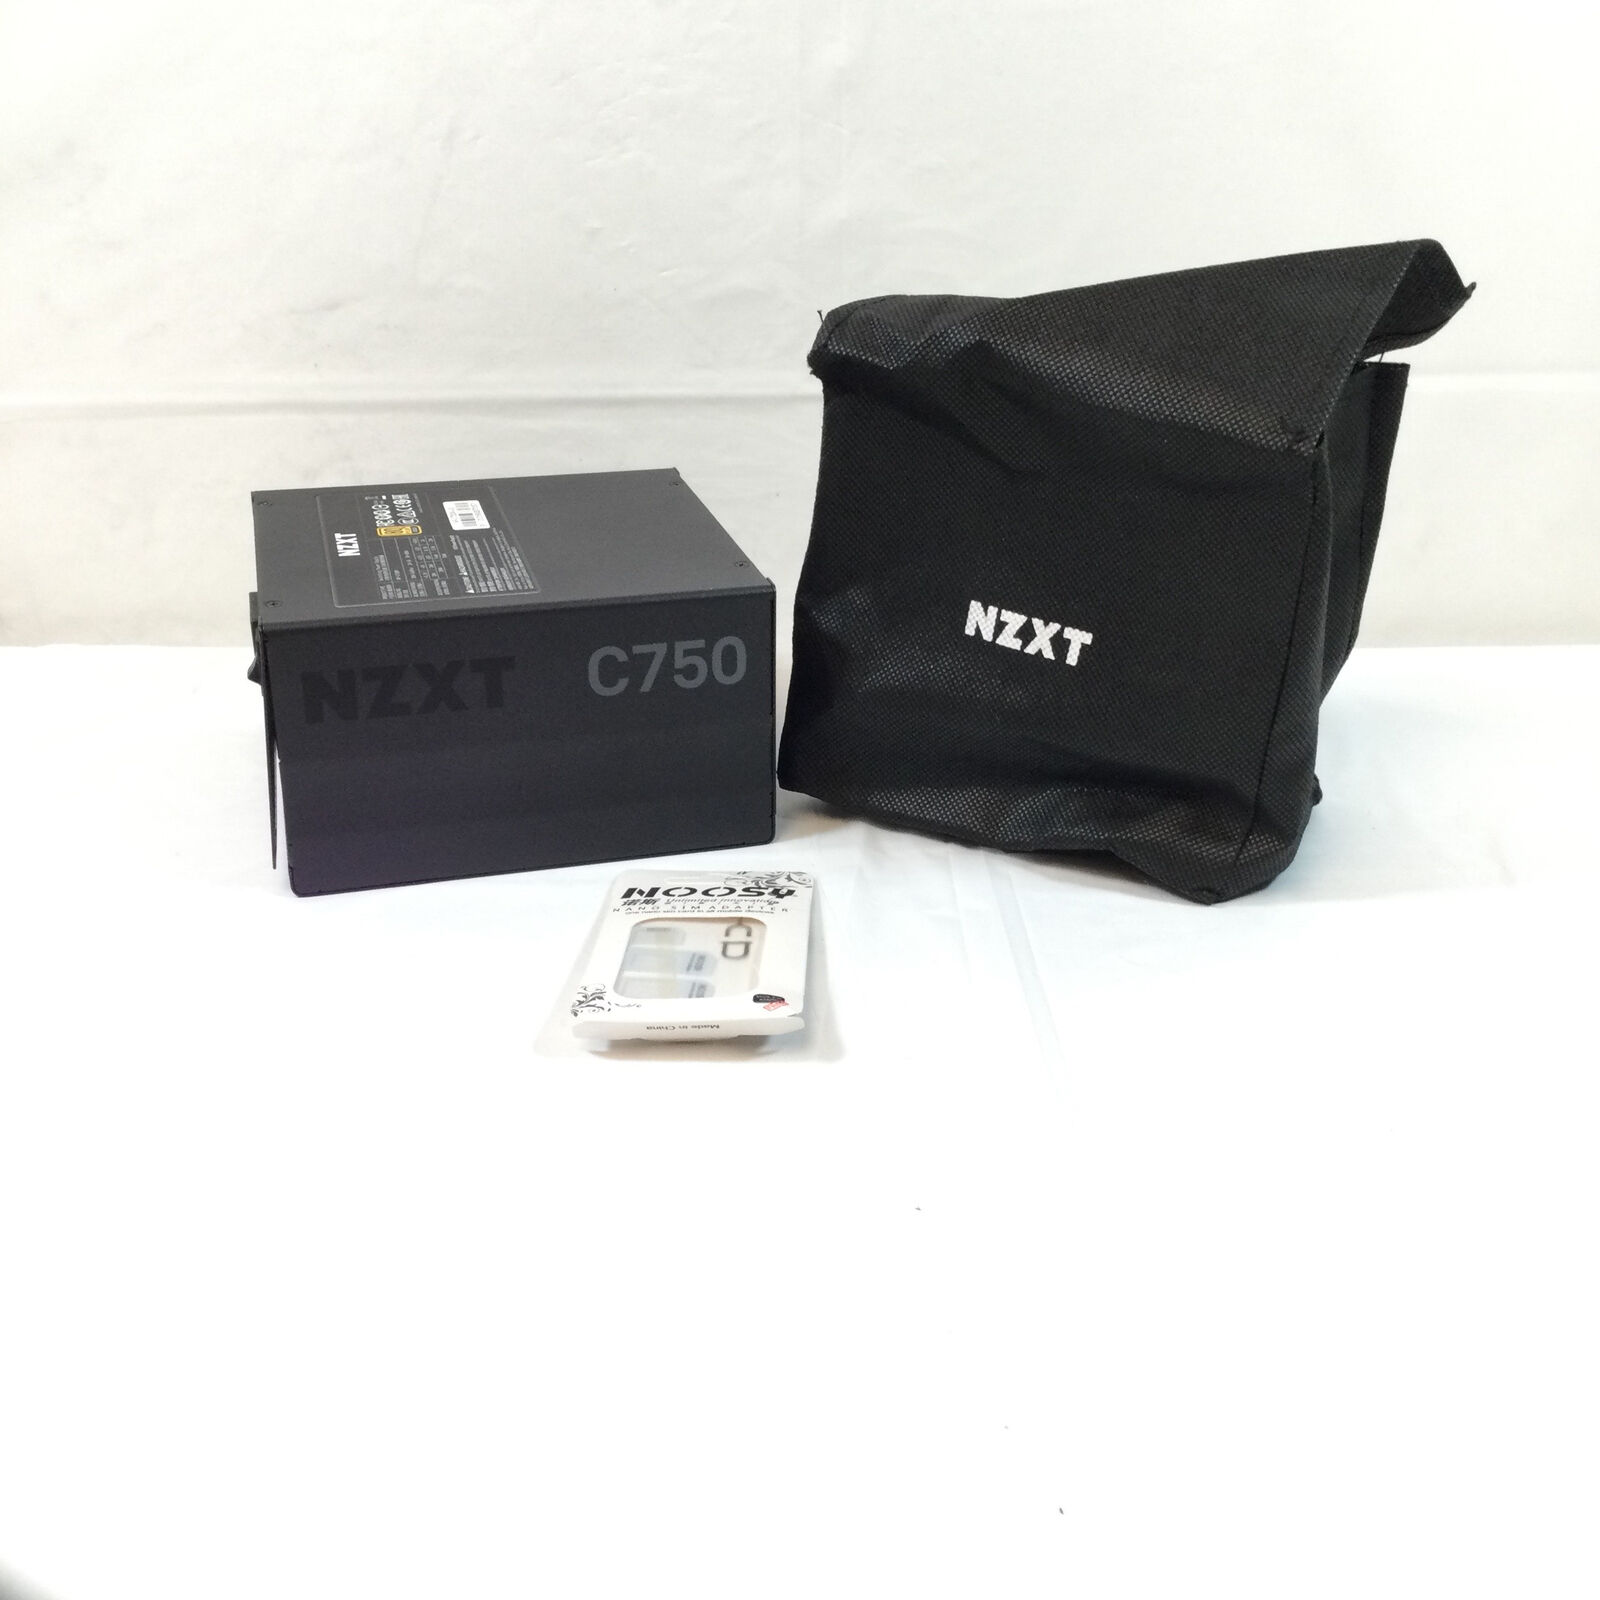 NZXT NP-C750M Black 80 Plus Gold Corded Electric Switching Power Supply Used